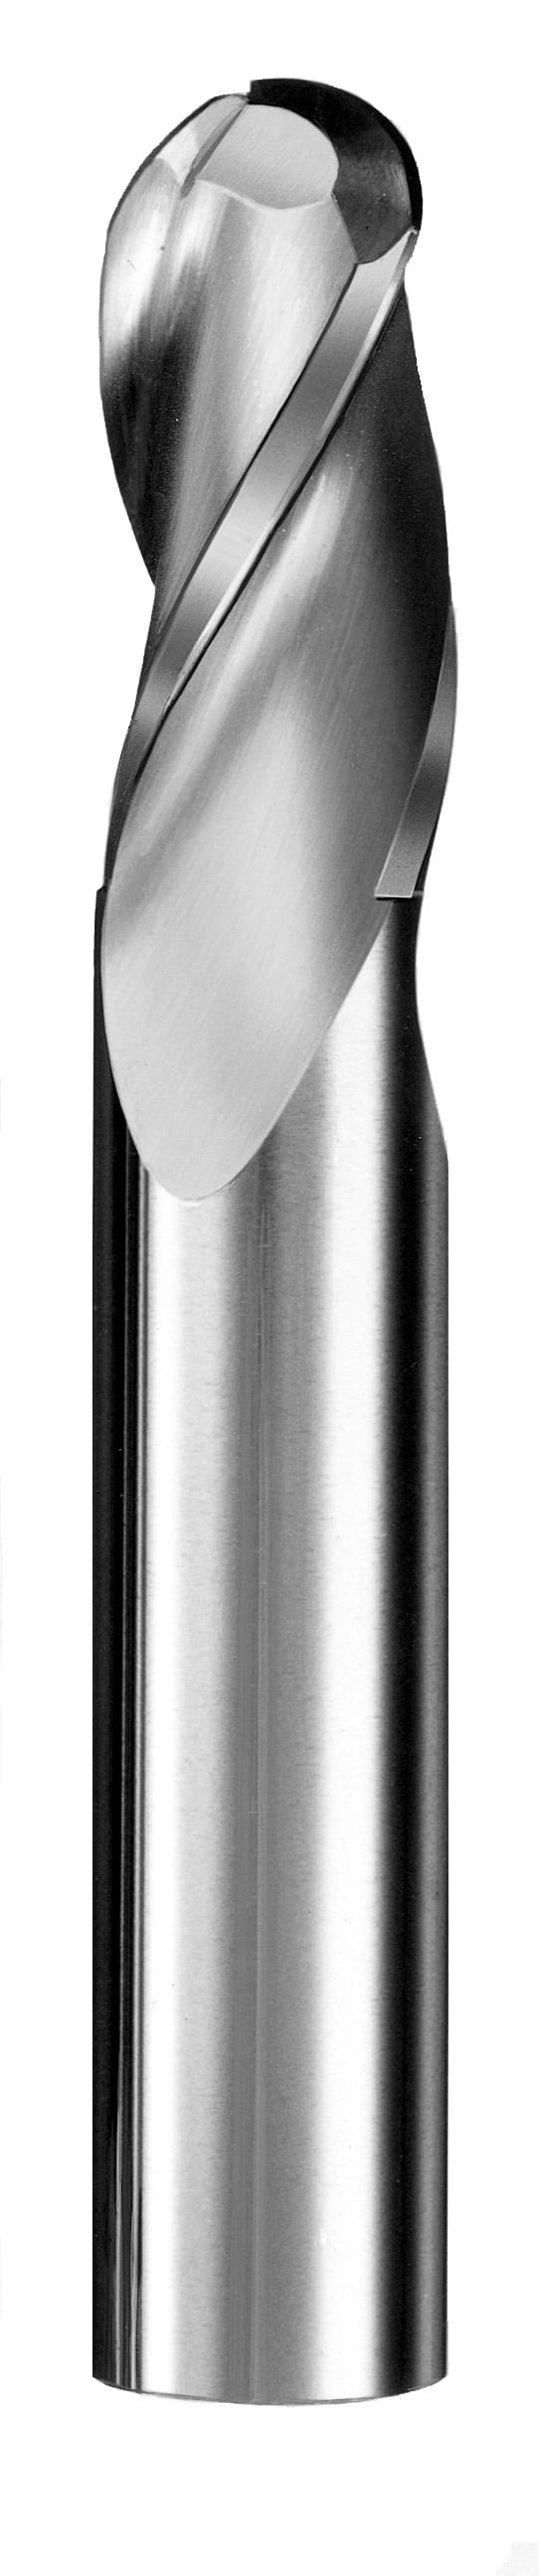 5/8" Dia, 3 Flute, Ball Nose End Mill - 30568